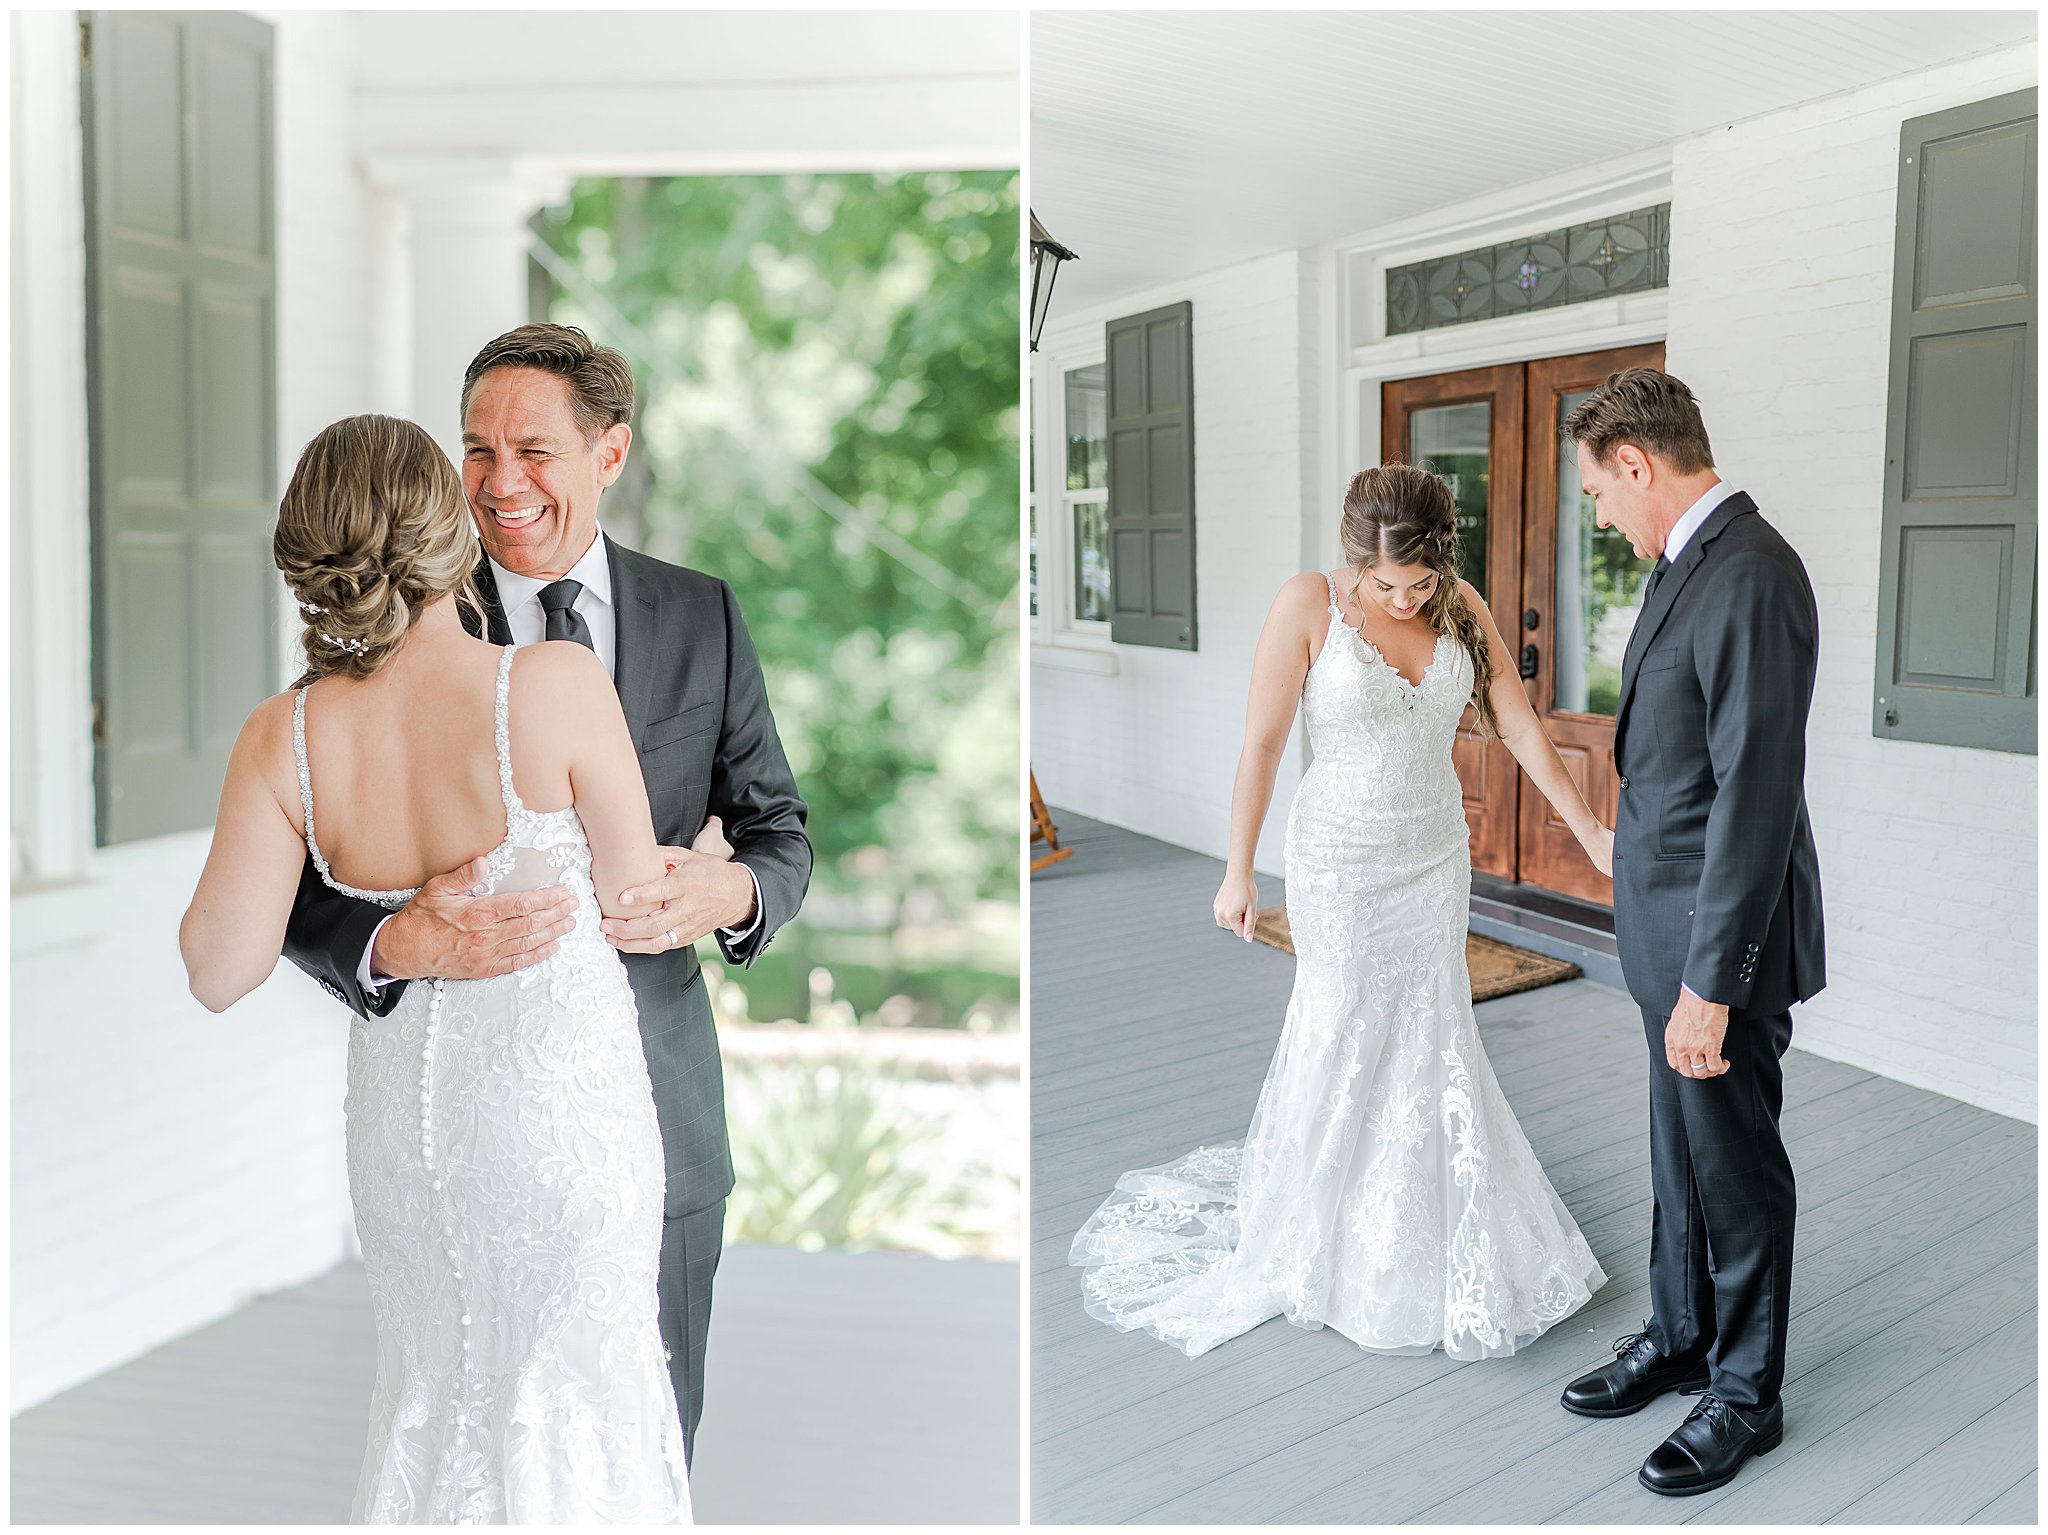 Historic Ashland Wedding | Historic Ashland Wedding Photographer | Wrightsville PA | Wrightsville PA Wedding | Wrightsville PA Wedding Venue | First look | Daddy Daughter First Look